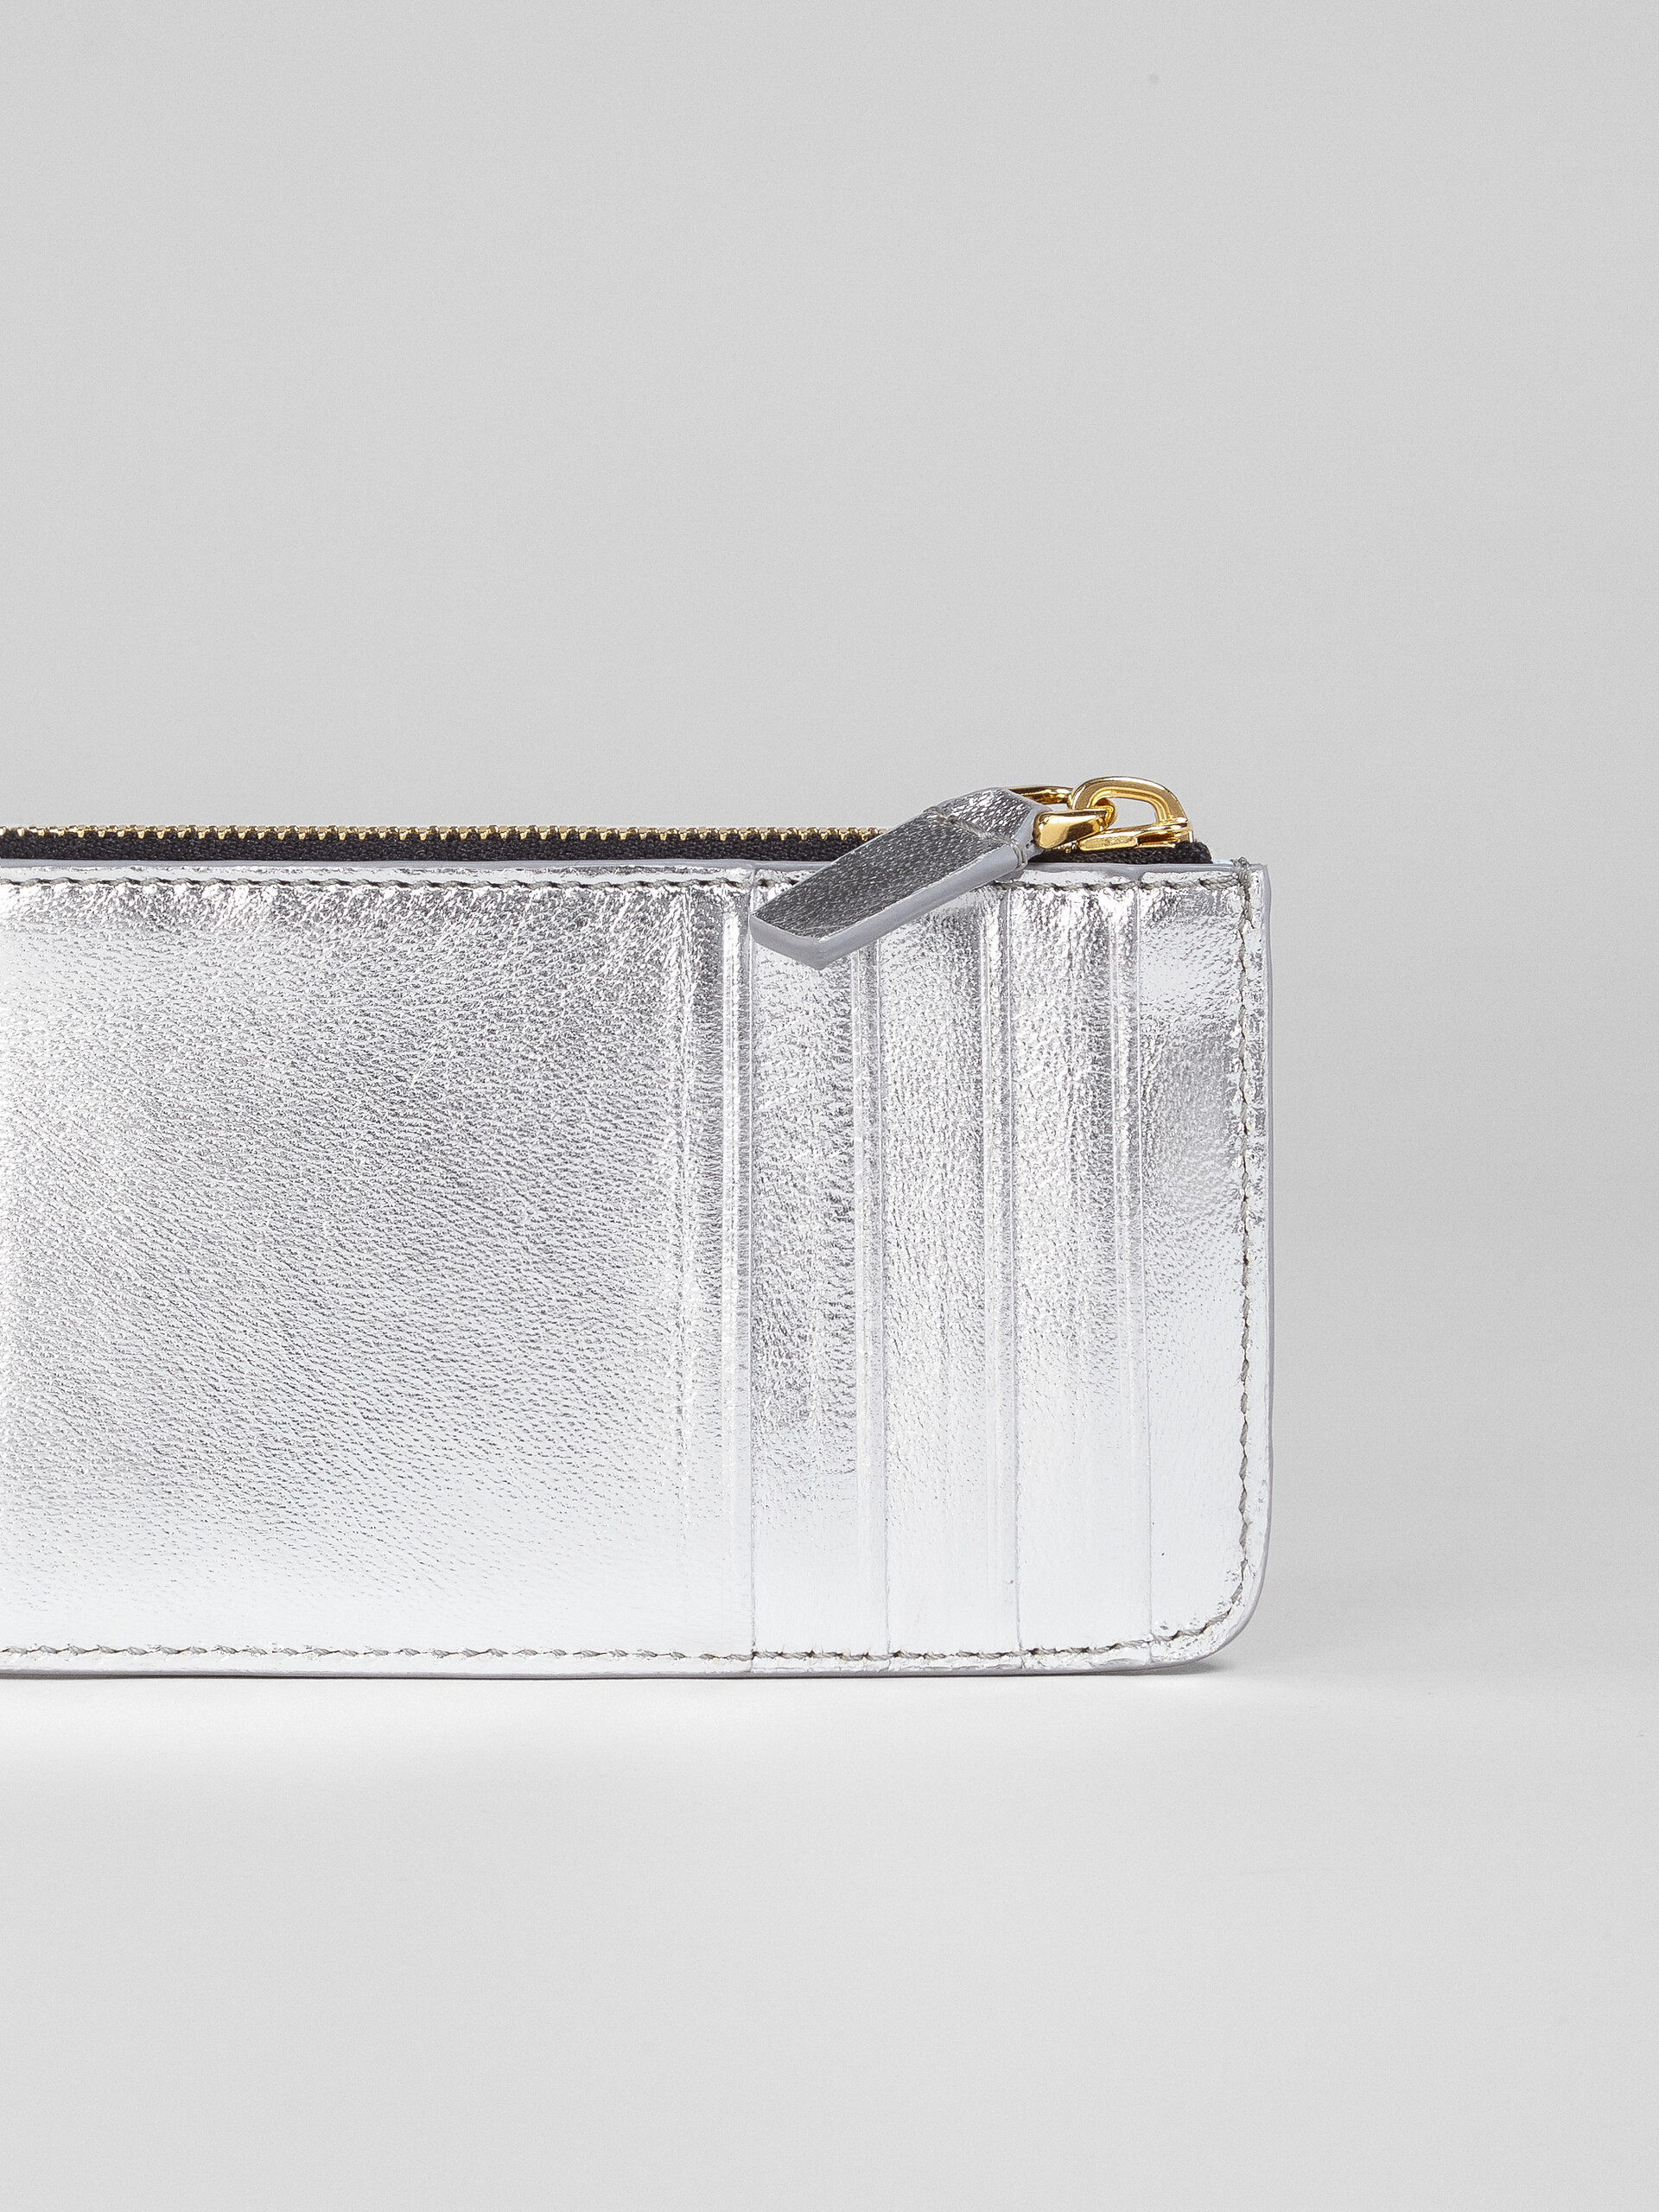 Silver metallic nappa leather card case - Wallets - Image 4